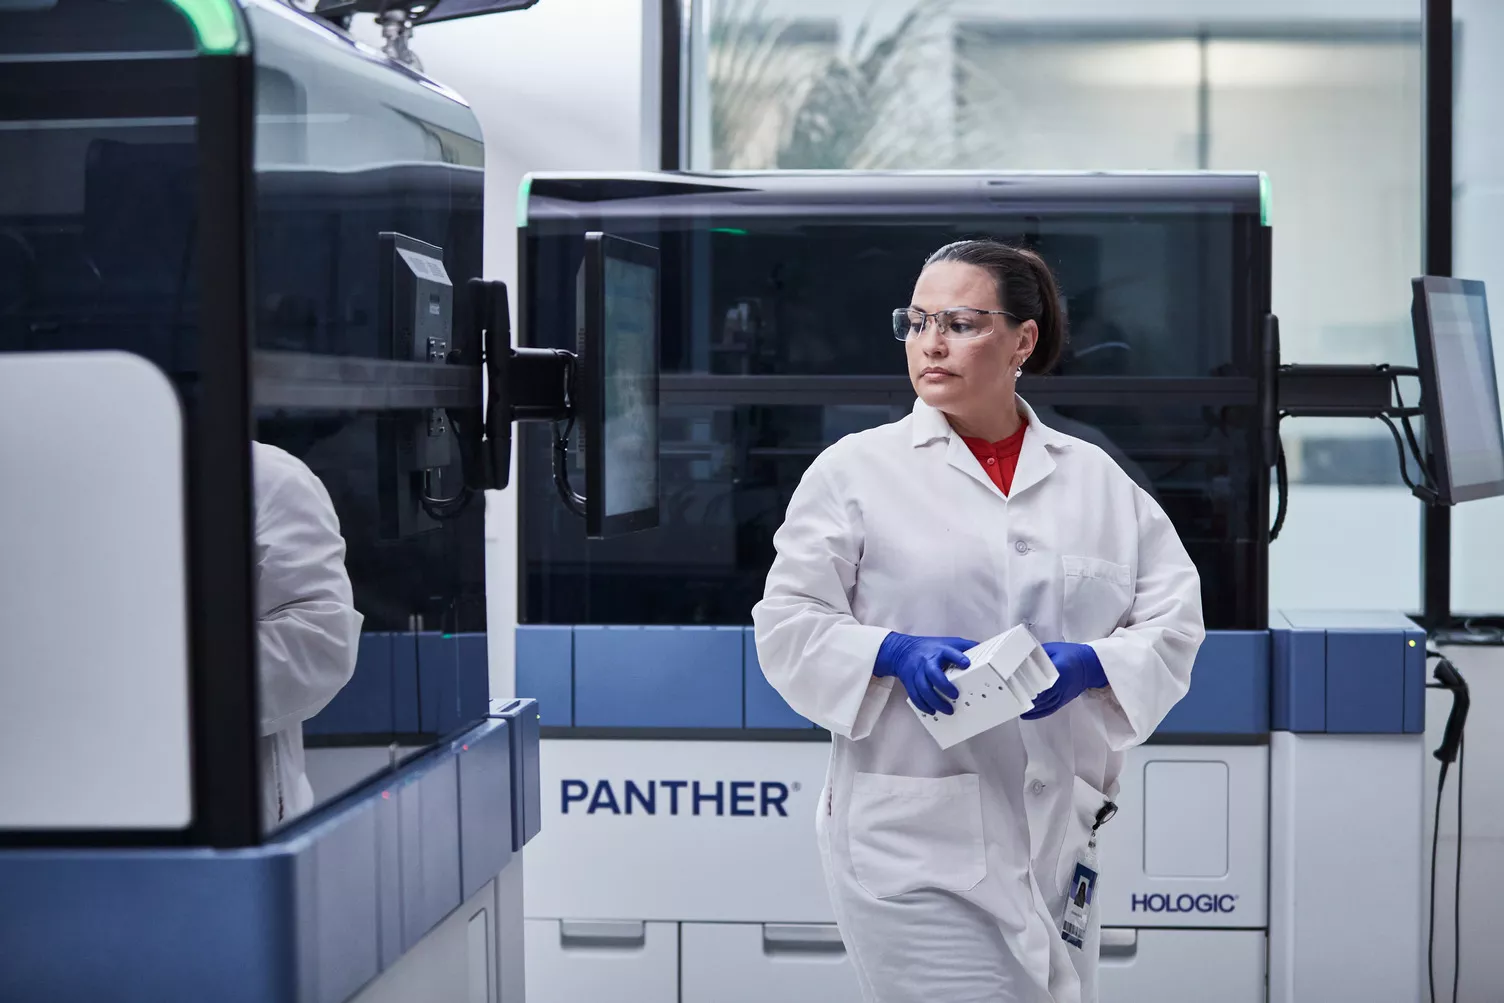 Technician walking through Panther systems in a lab setting